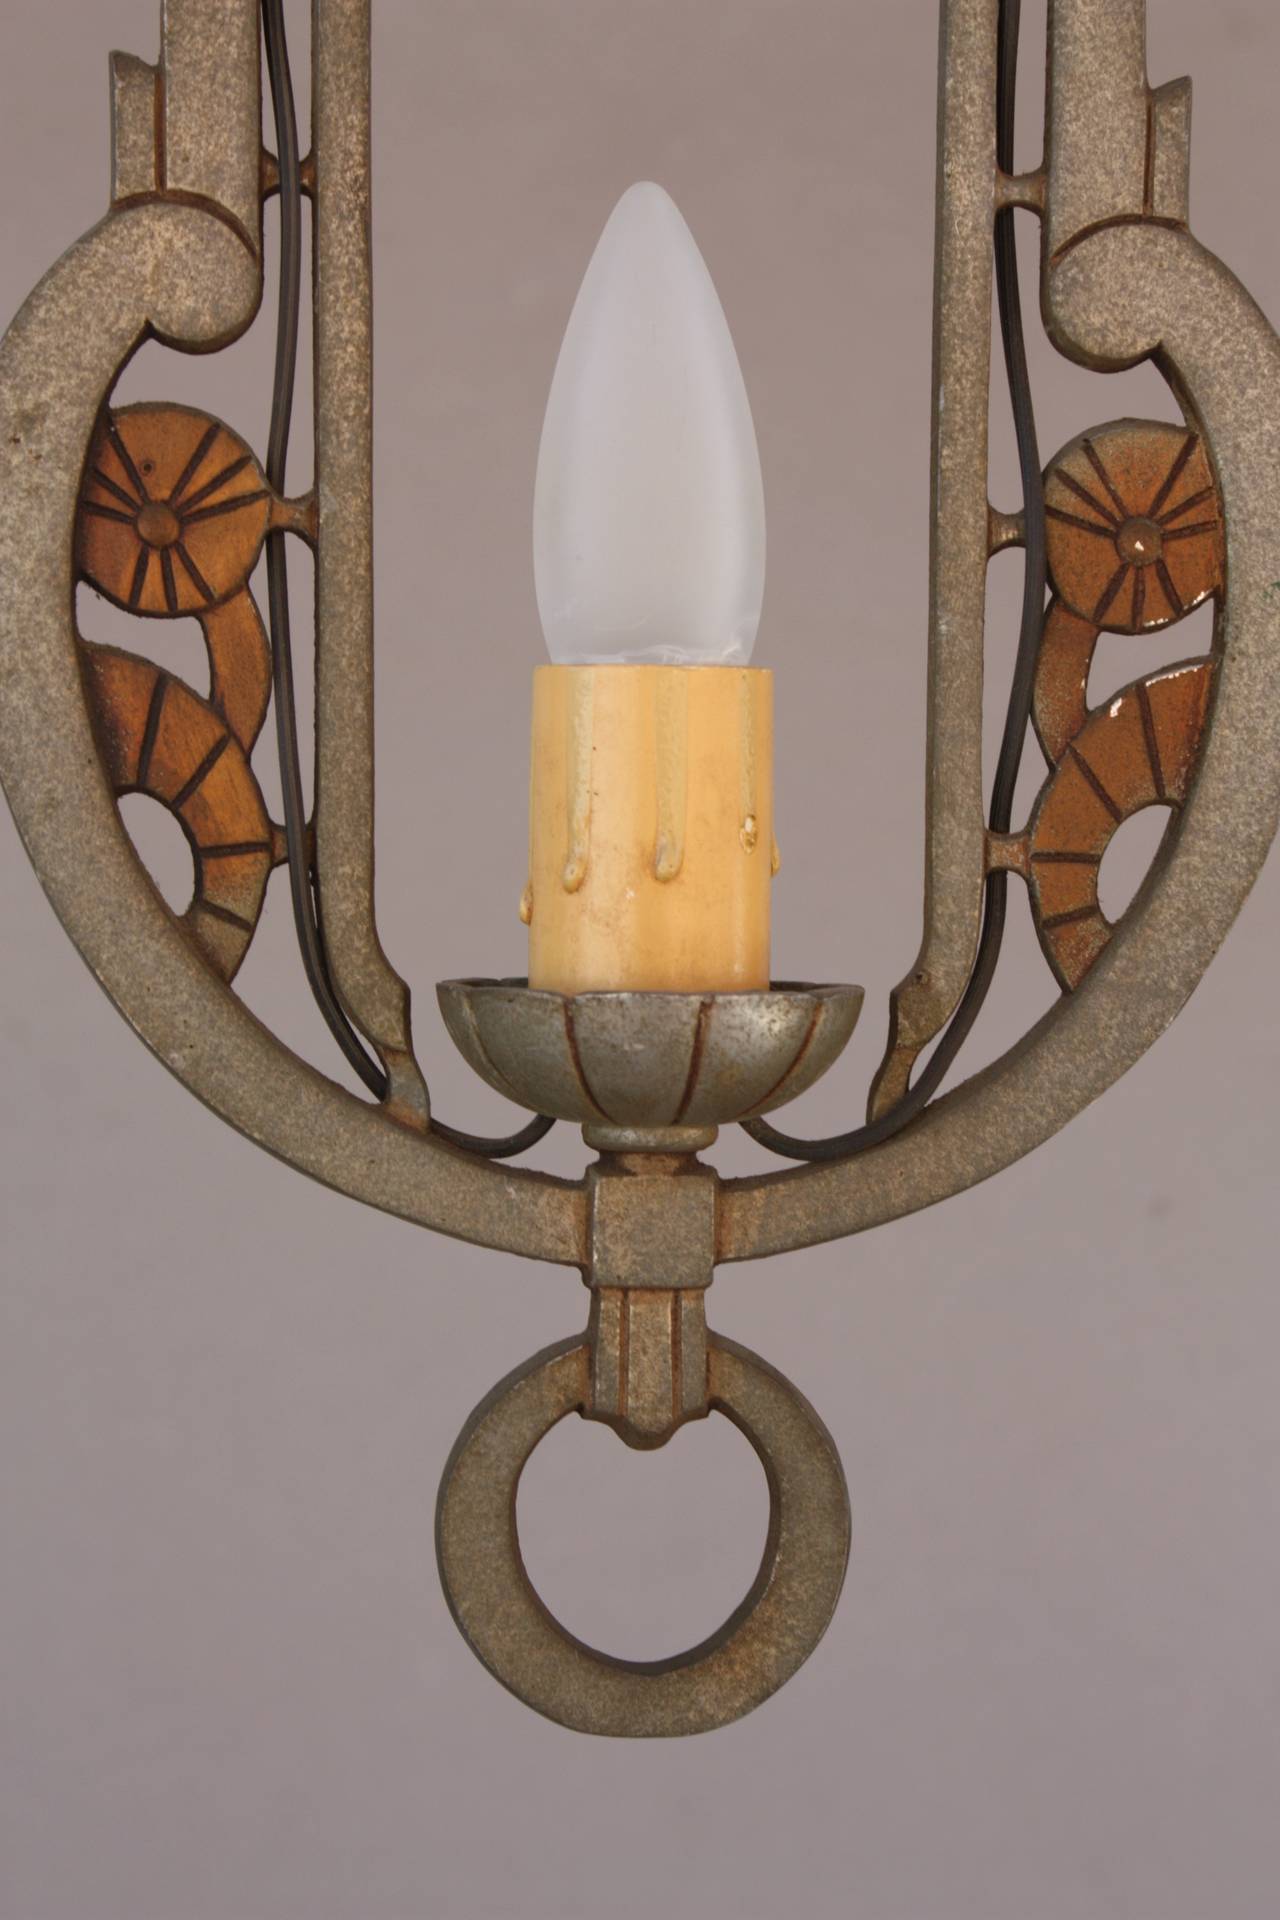 Elegant two toned ceiling mount with one light.Measures: 15.1/4